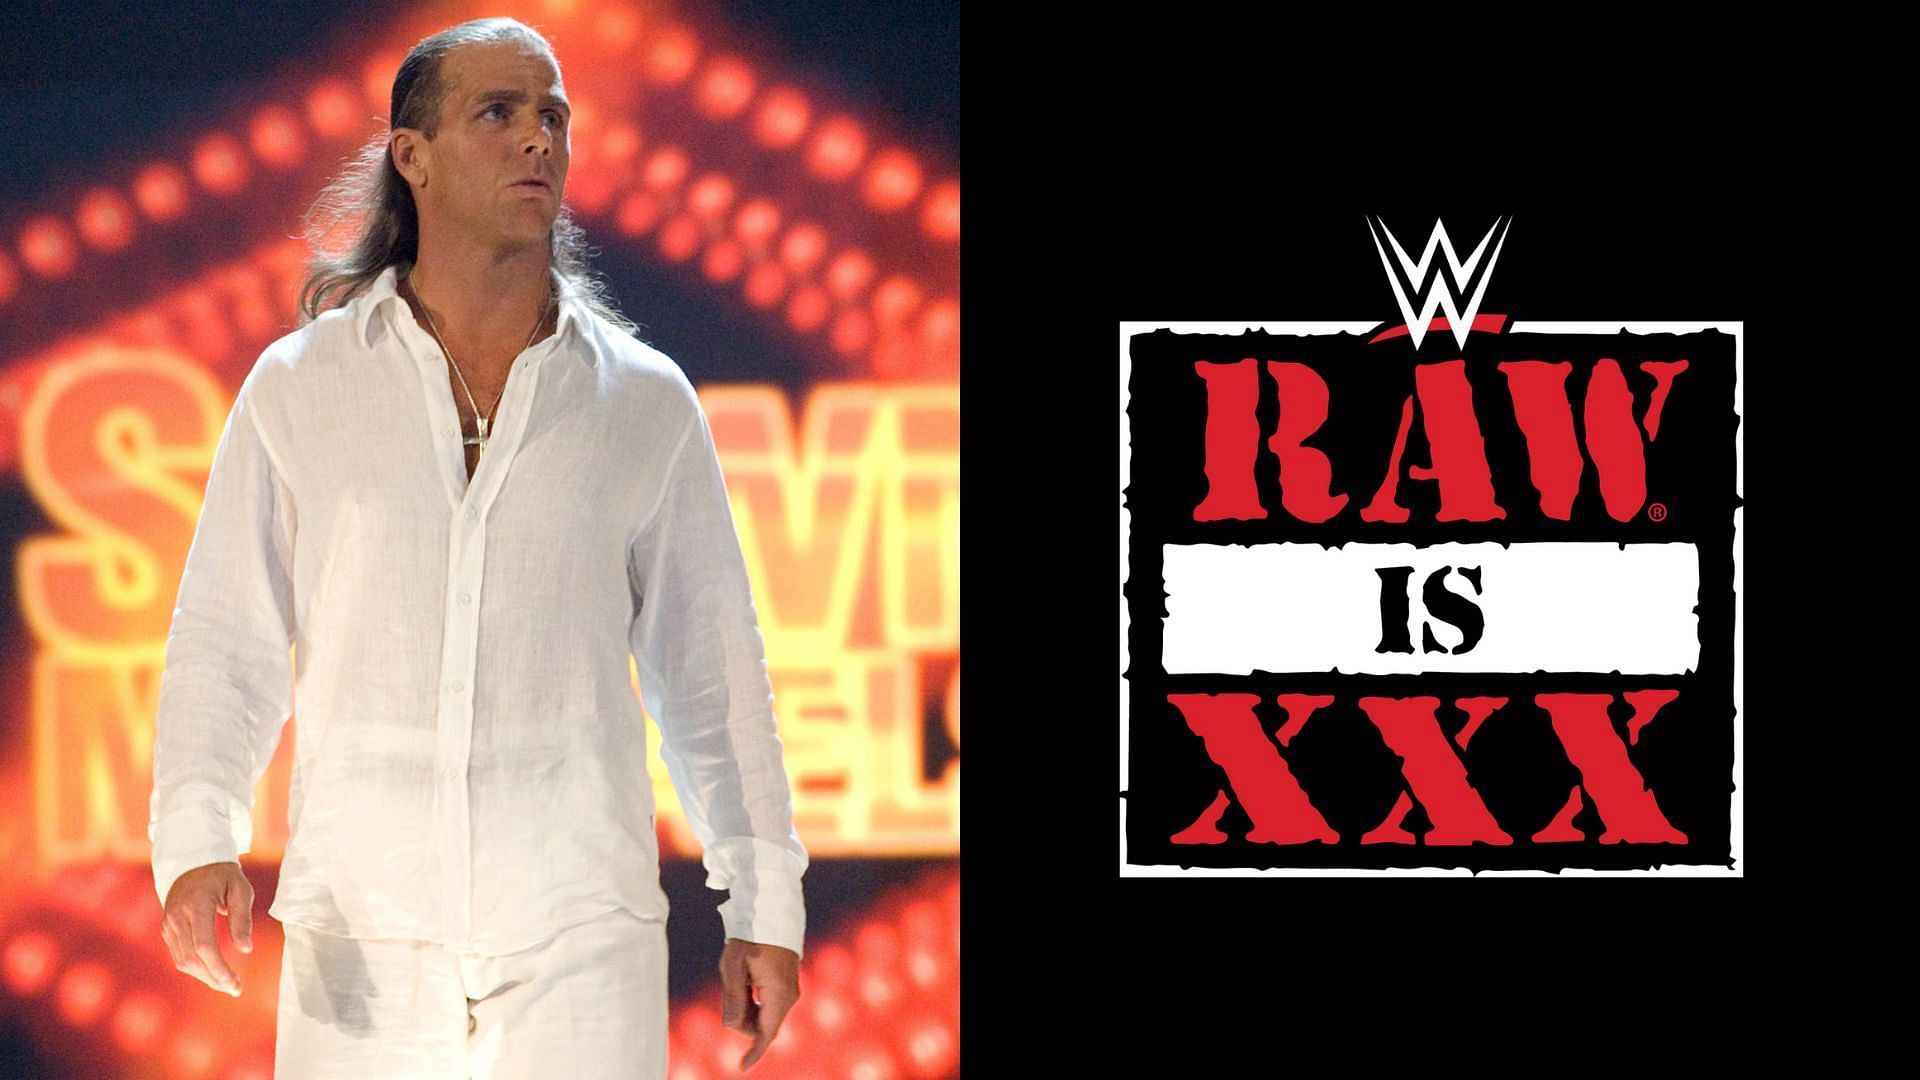 Shawn Michaels is one of the pioneers of WWE RAW 